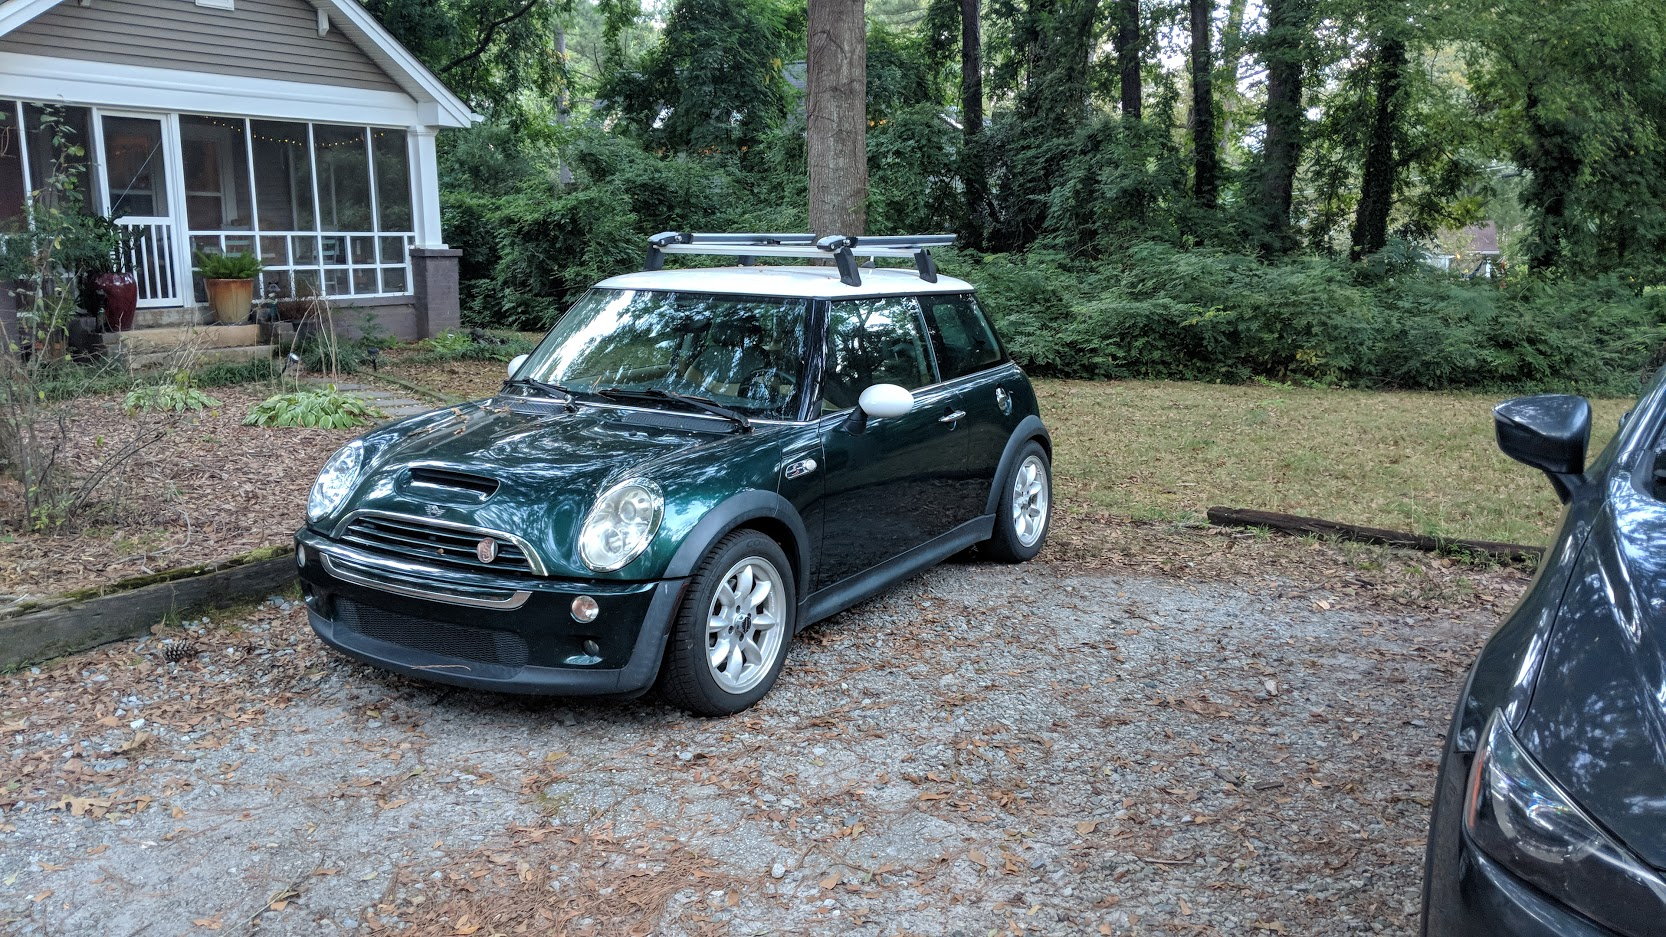 Mini Cooper S: Personality without a roof